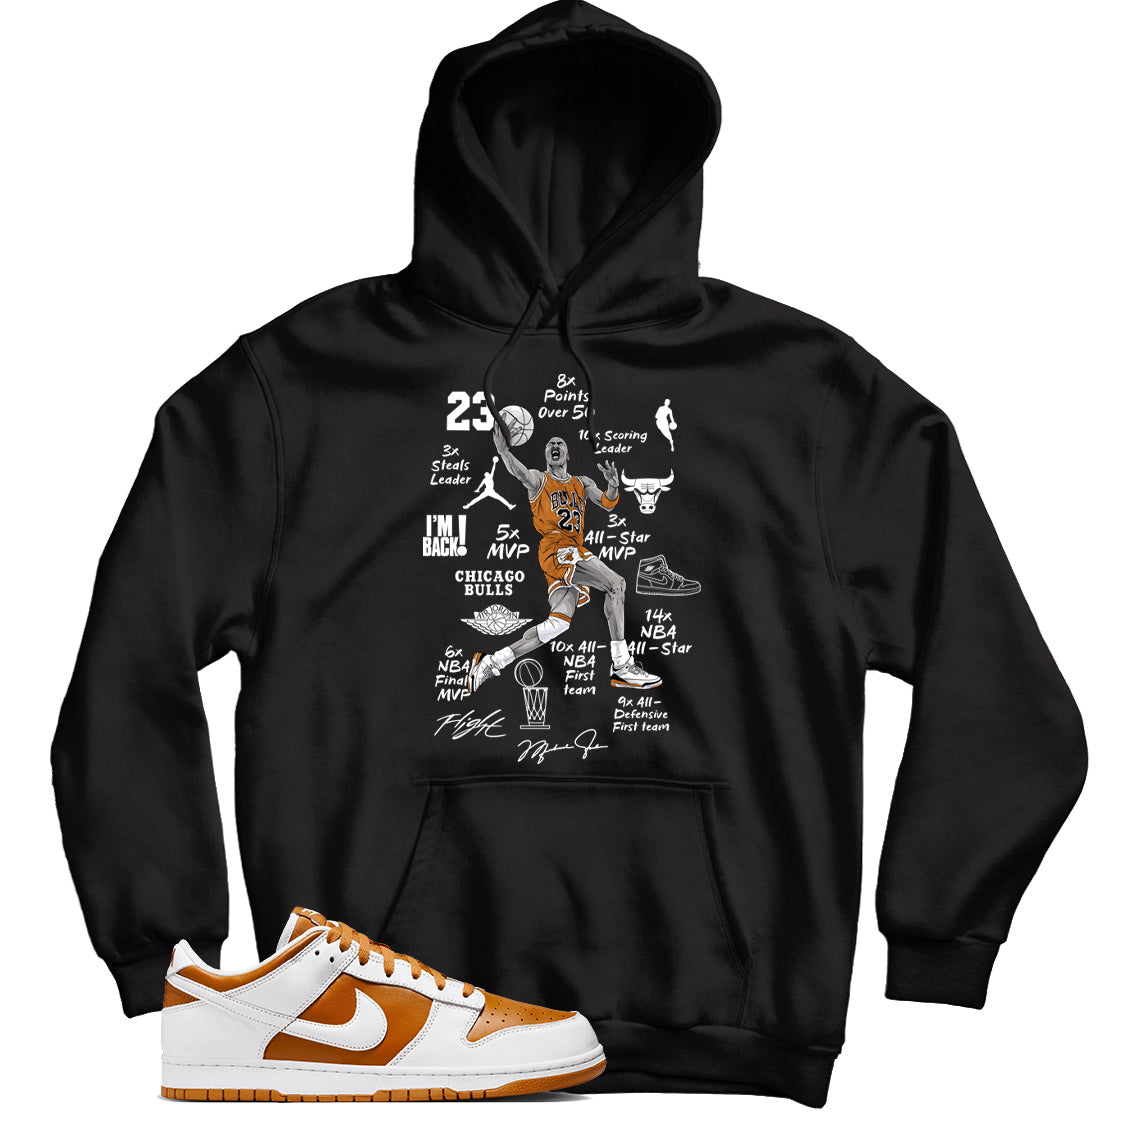 Reverse Curry dunks hoodie